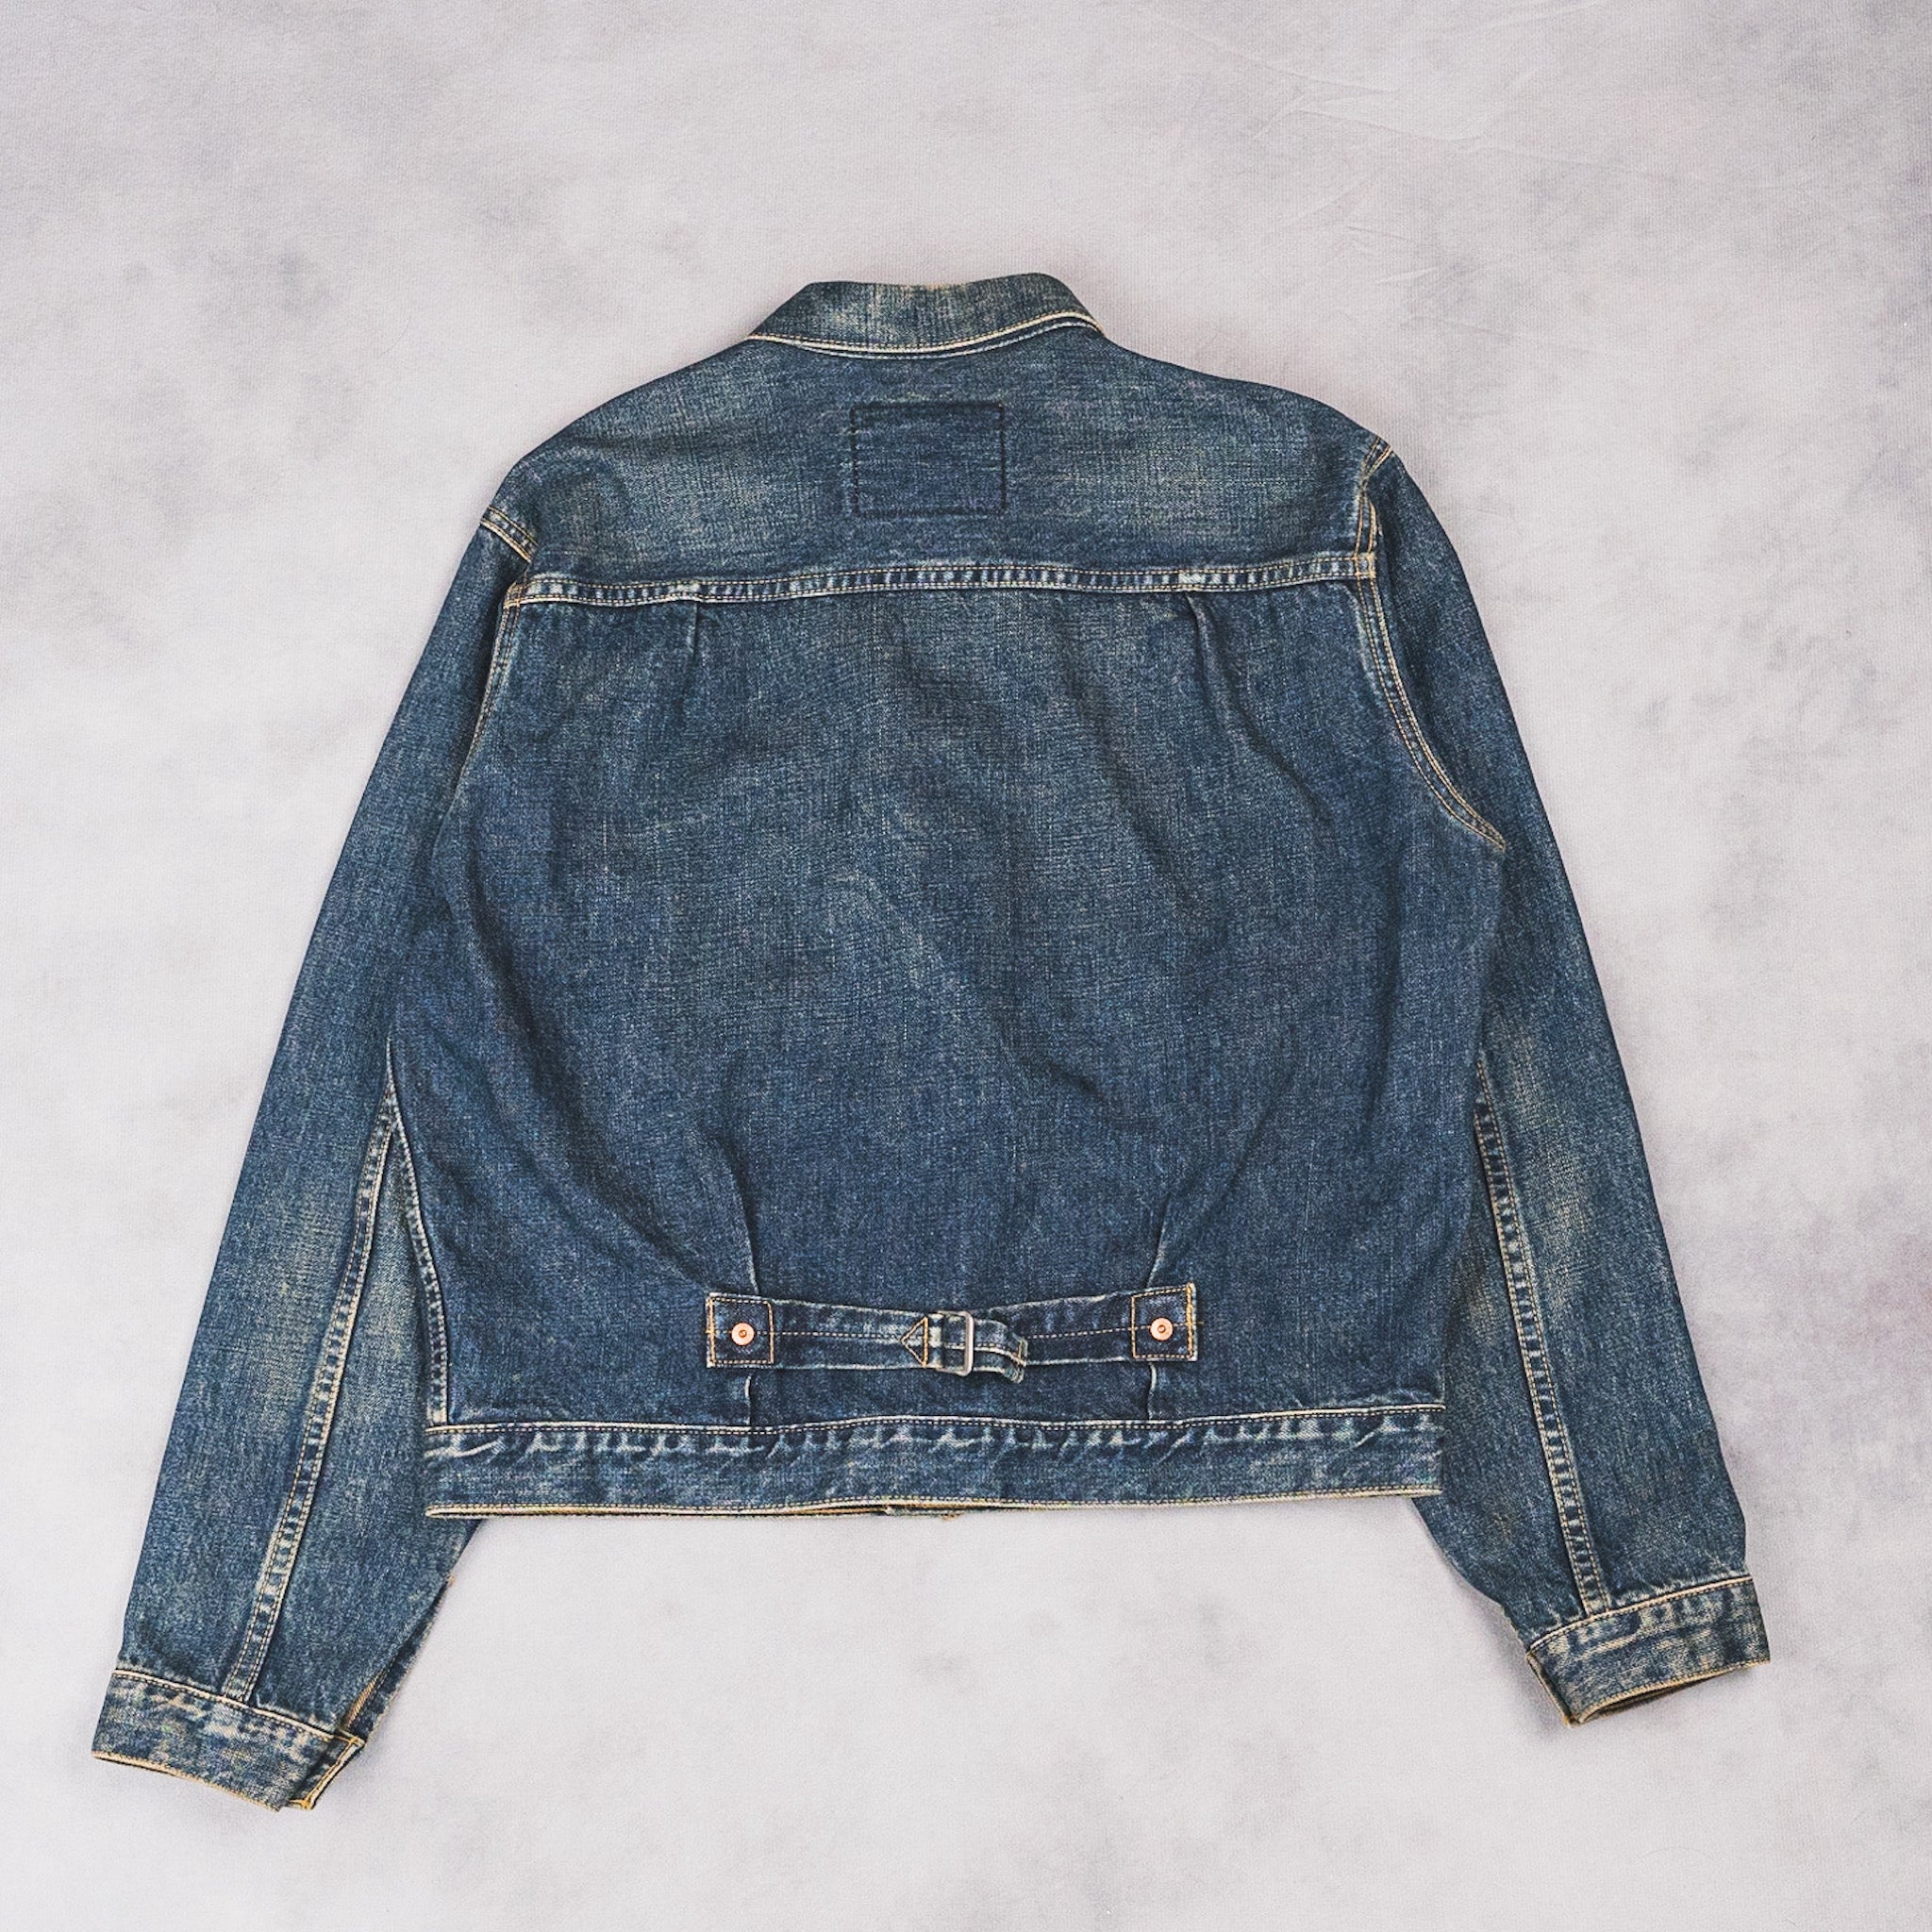 Levi's Japan 71506 Type 1 Big E Jacket 38 – The Grand Mcqueen